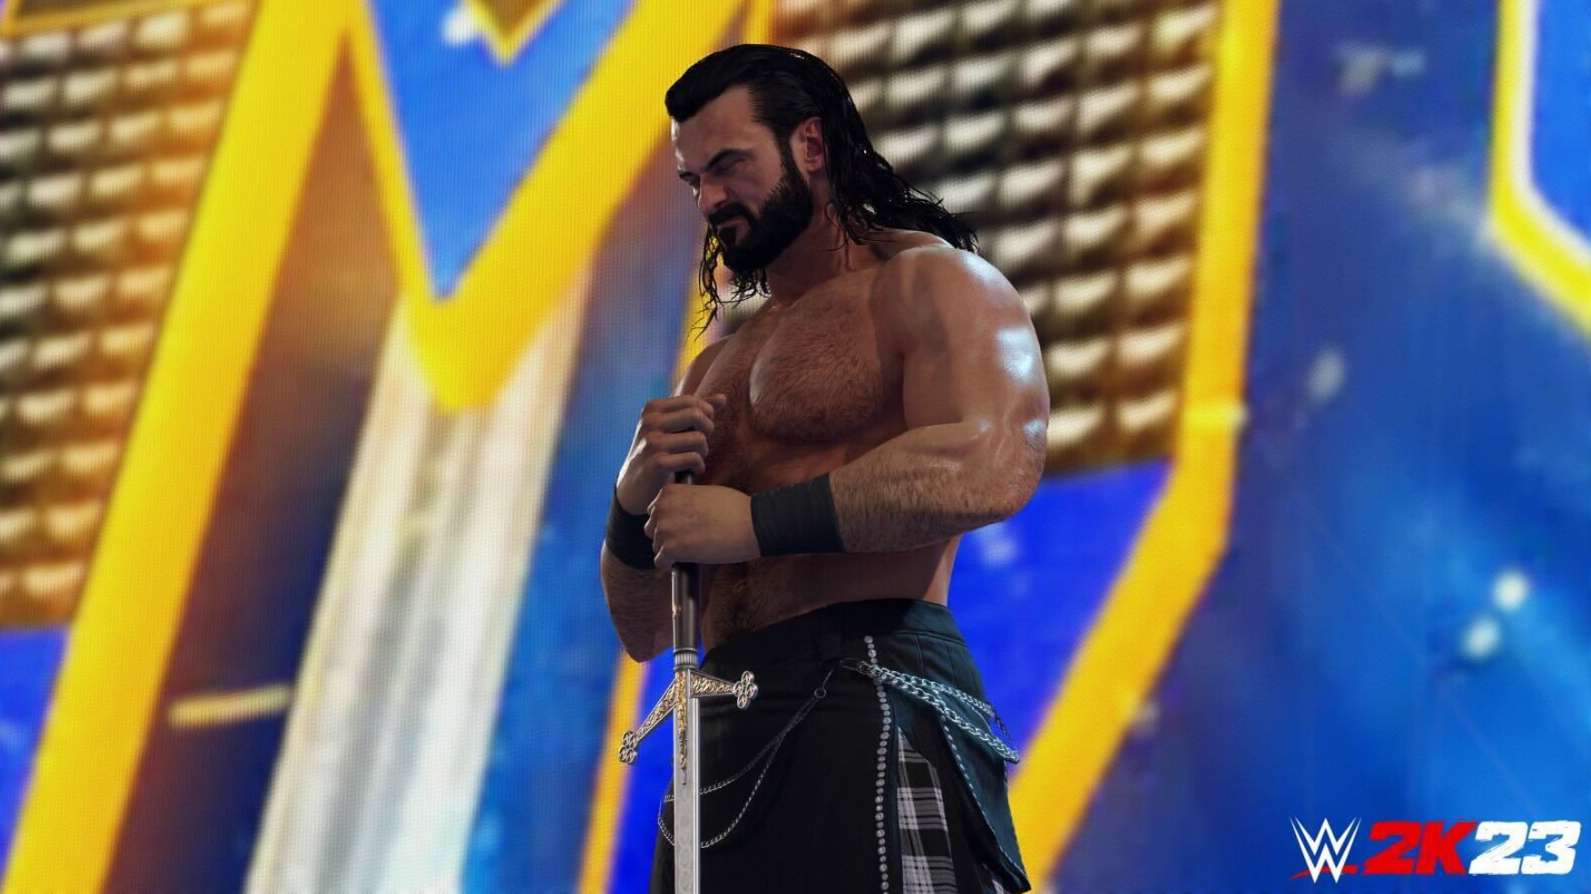 WWE 2K23 Roster Reveal